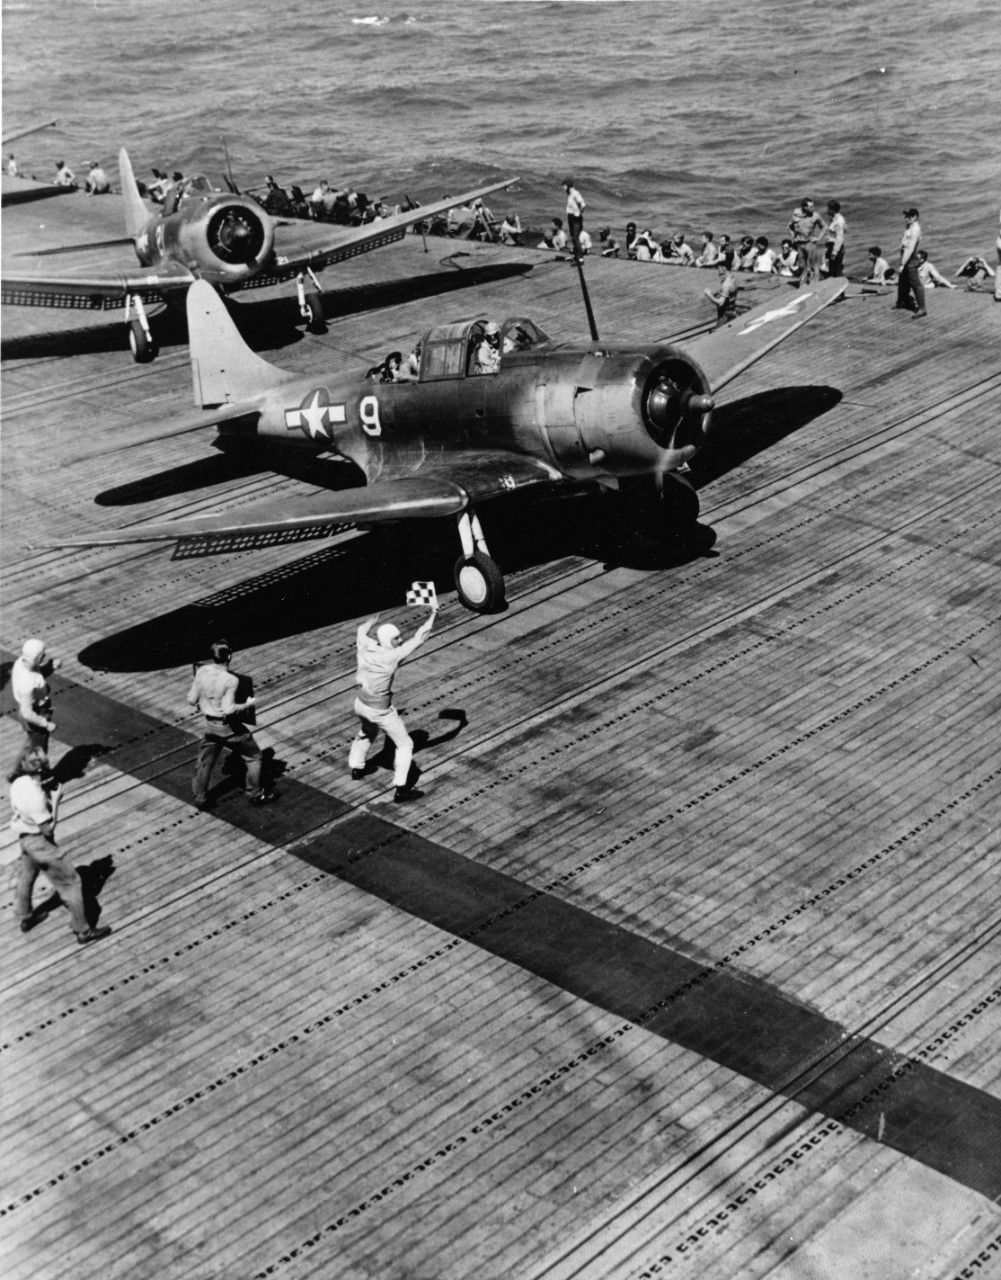 Douglas SBD-5 on the flight deck of USS Yorktown (CV-10) awaits the take-off signal during a raid on a Japanese base, 1 September - 6 October 1943. Note flight deck officer holding flag, and man holding sign with last minute instructions for the pilot.